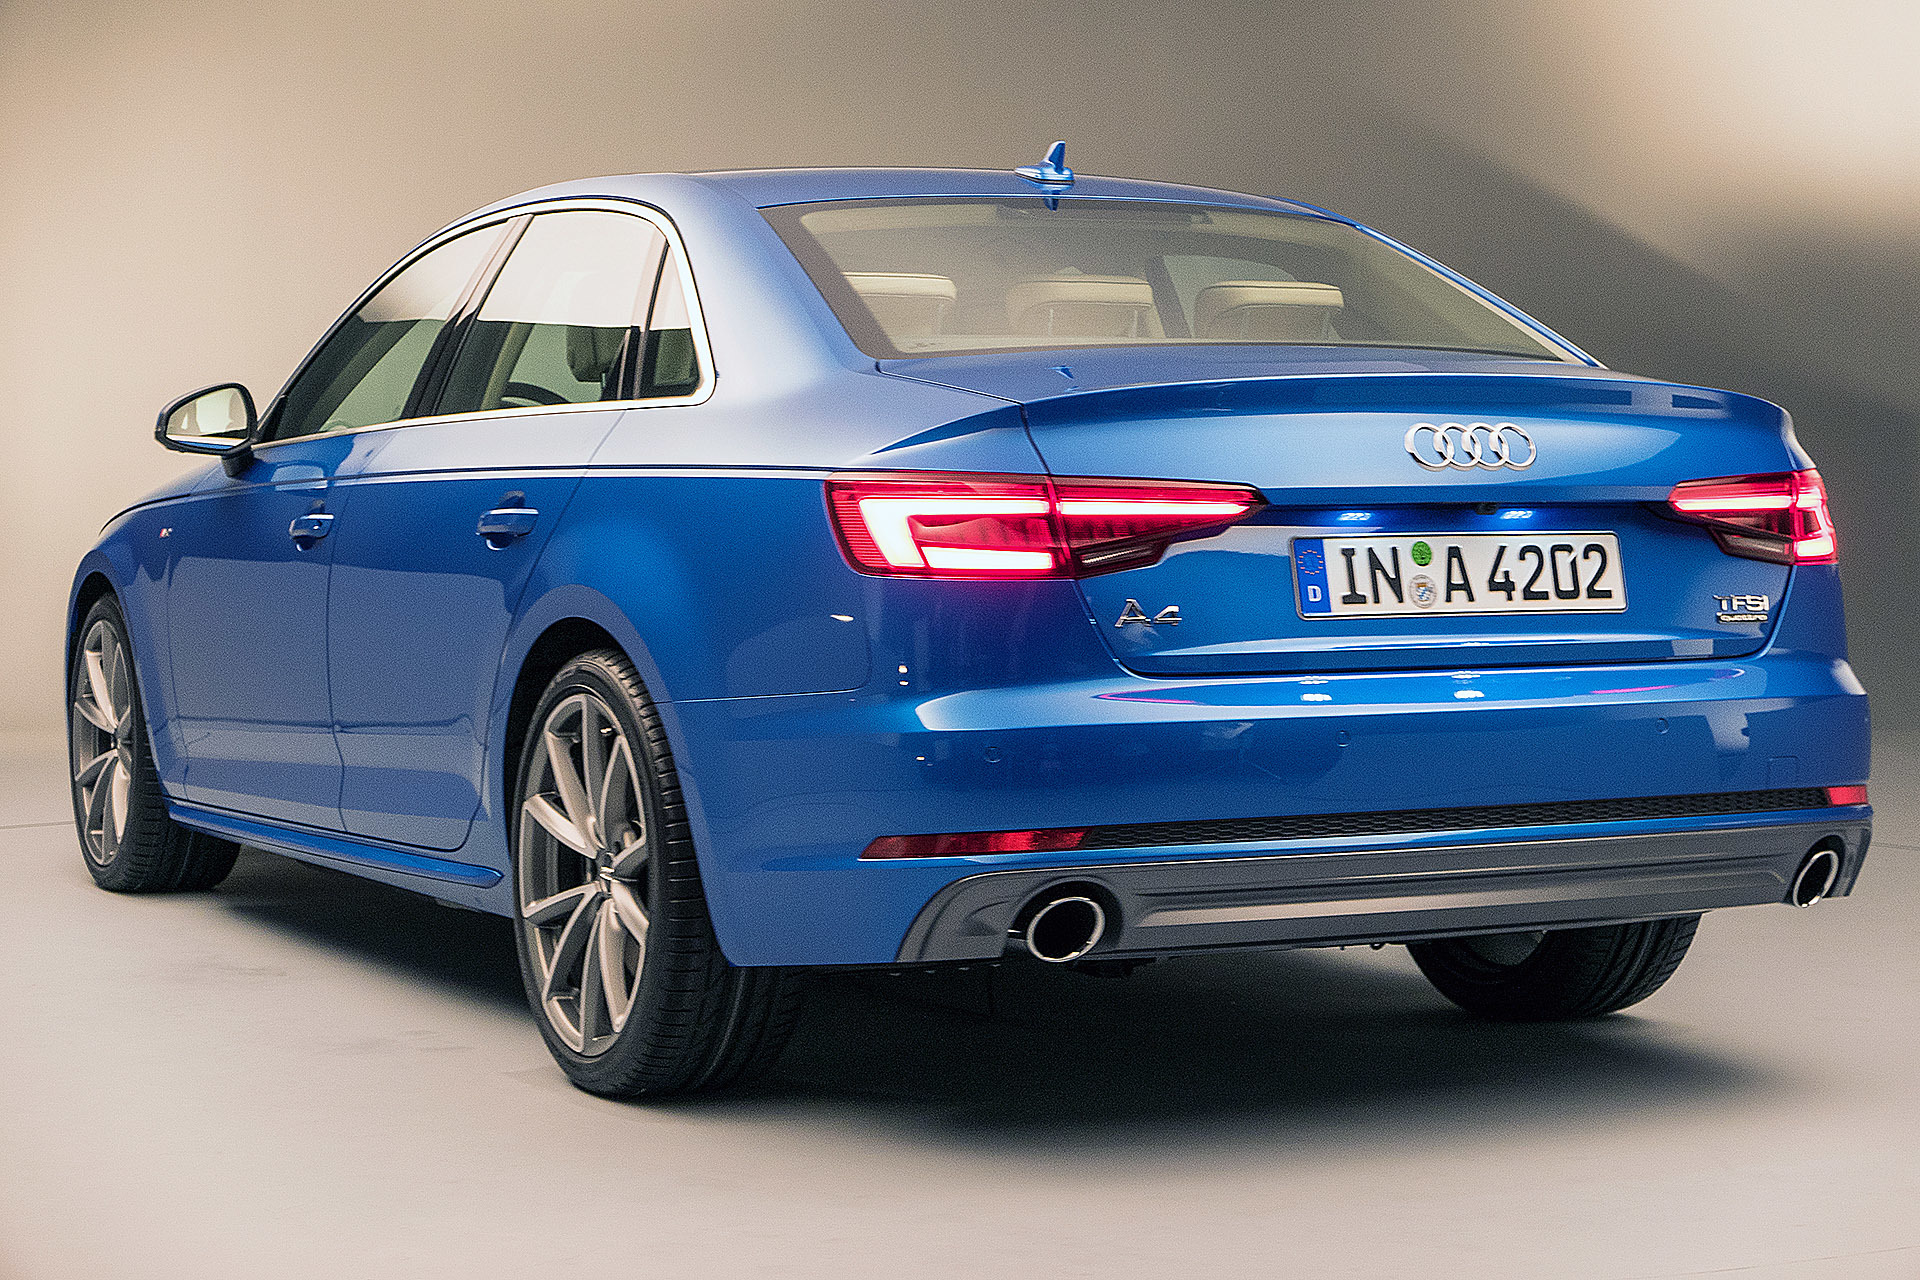 Audi Pakistan Will Start Delivering Its 2016 Audi A4 From February 